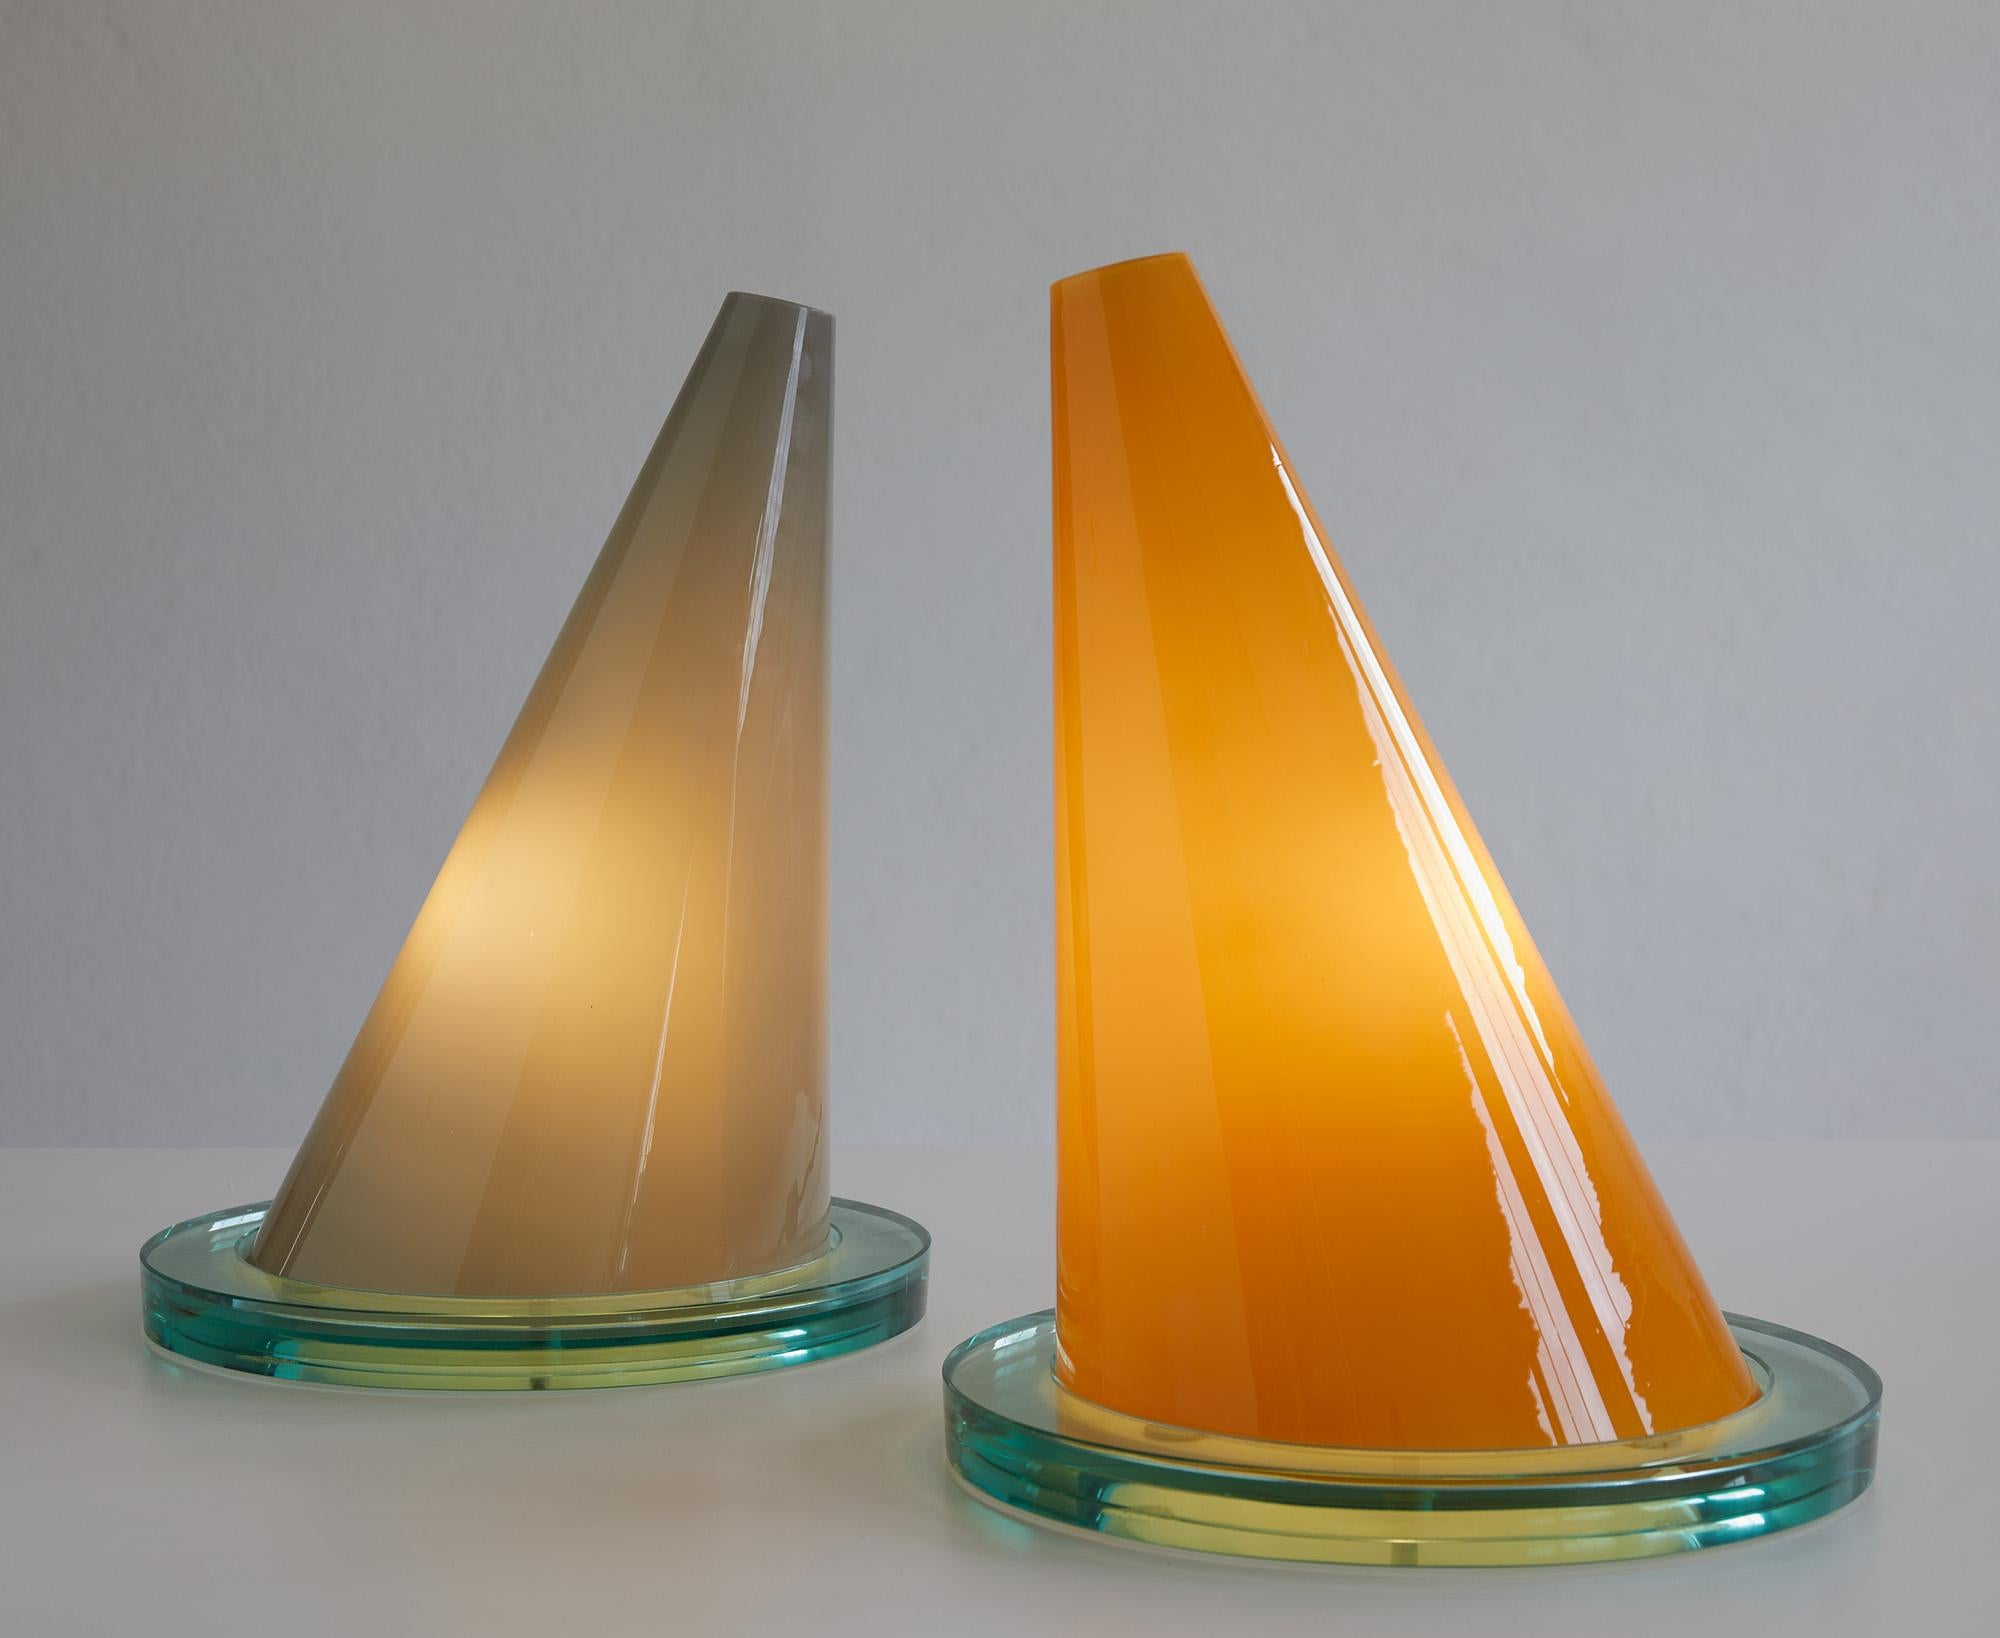 Pair of Oz model table lamps in murano glass by Daniela Puppa and Franco Raggi from 1981.

Edition Fontana Arte 1981

Each lamp is composed of an inclined conical lampshade in 